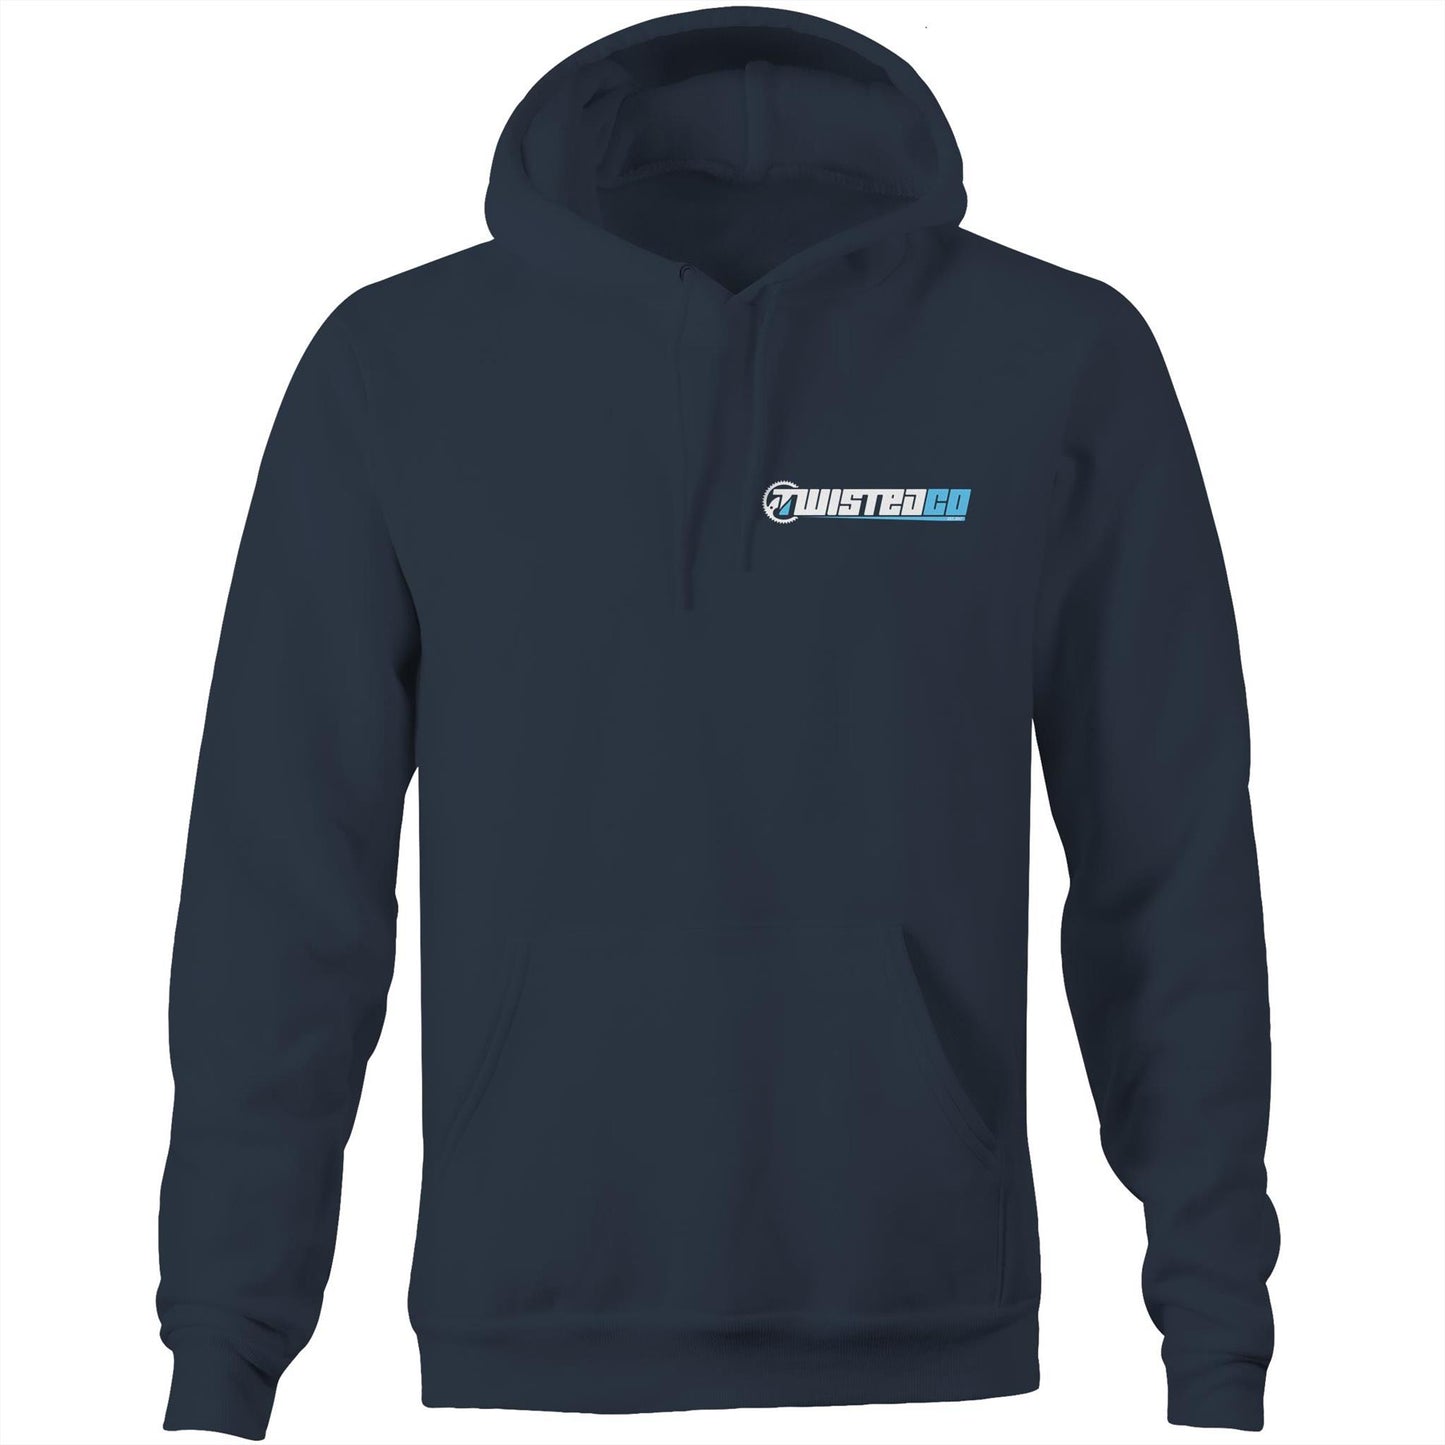 Twisted Co AS Colour Classic Hoodie - Light Blue logo Black/Navy/Grey